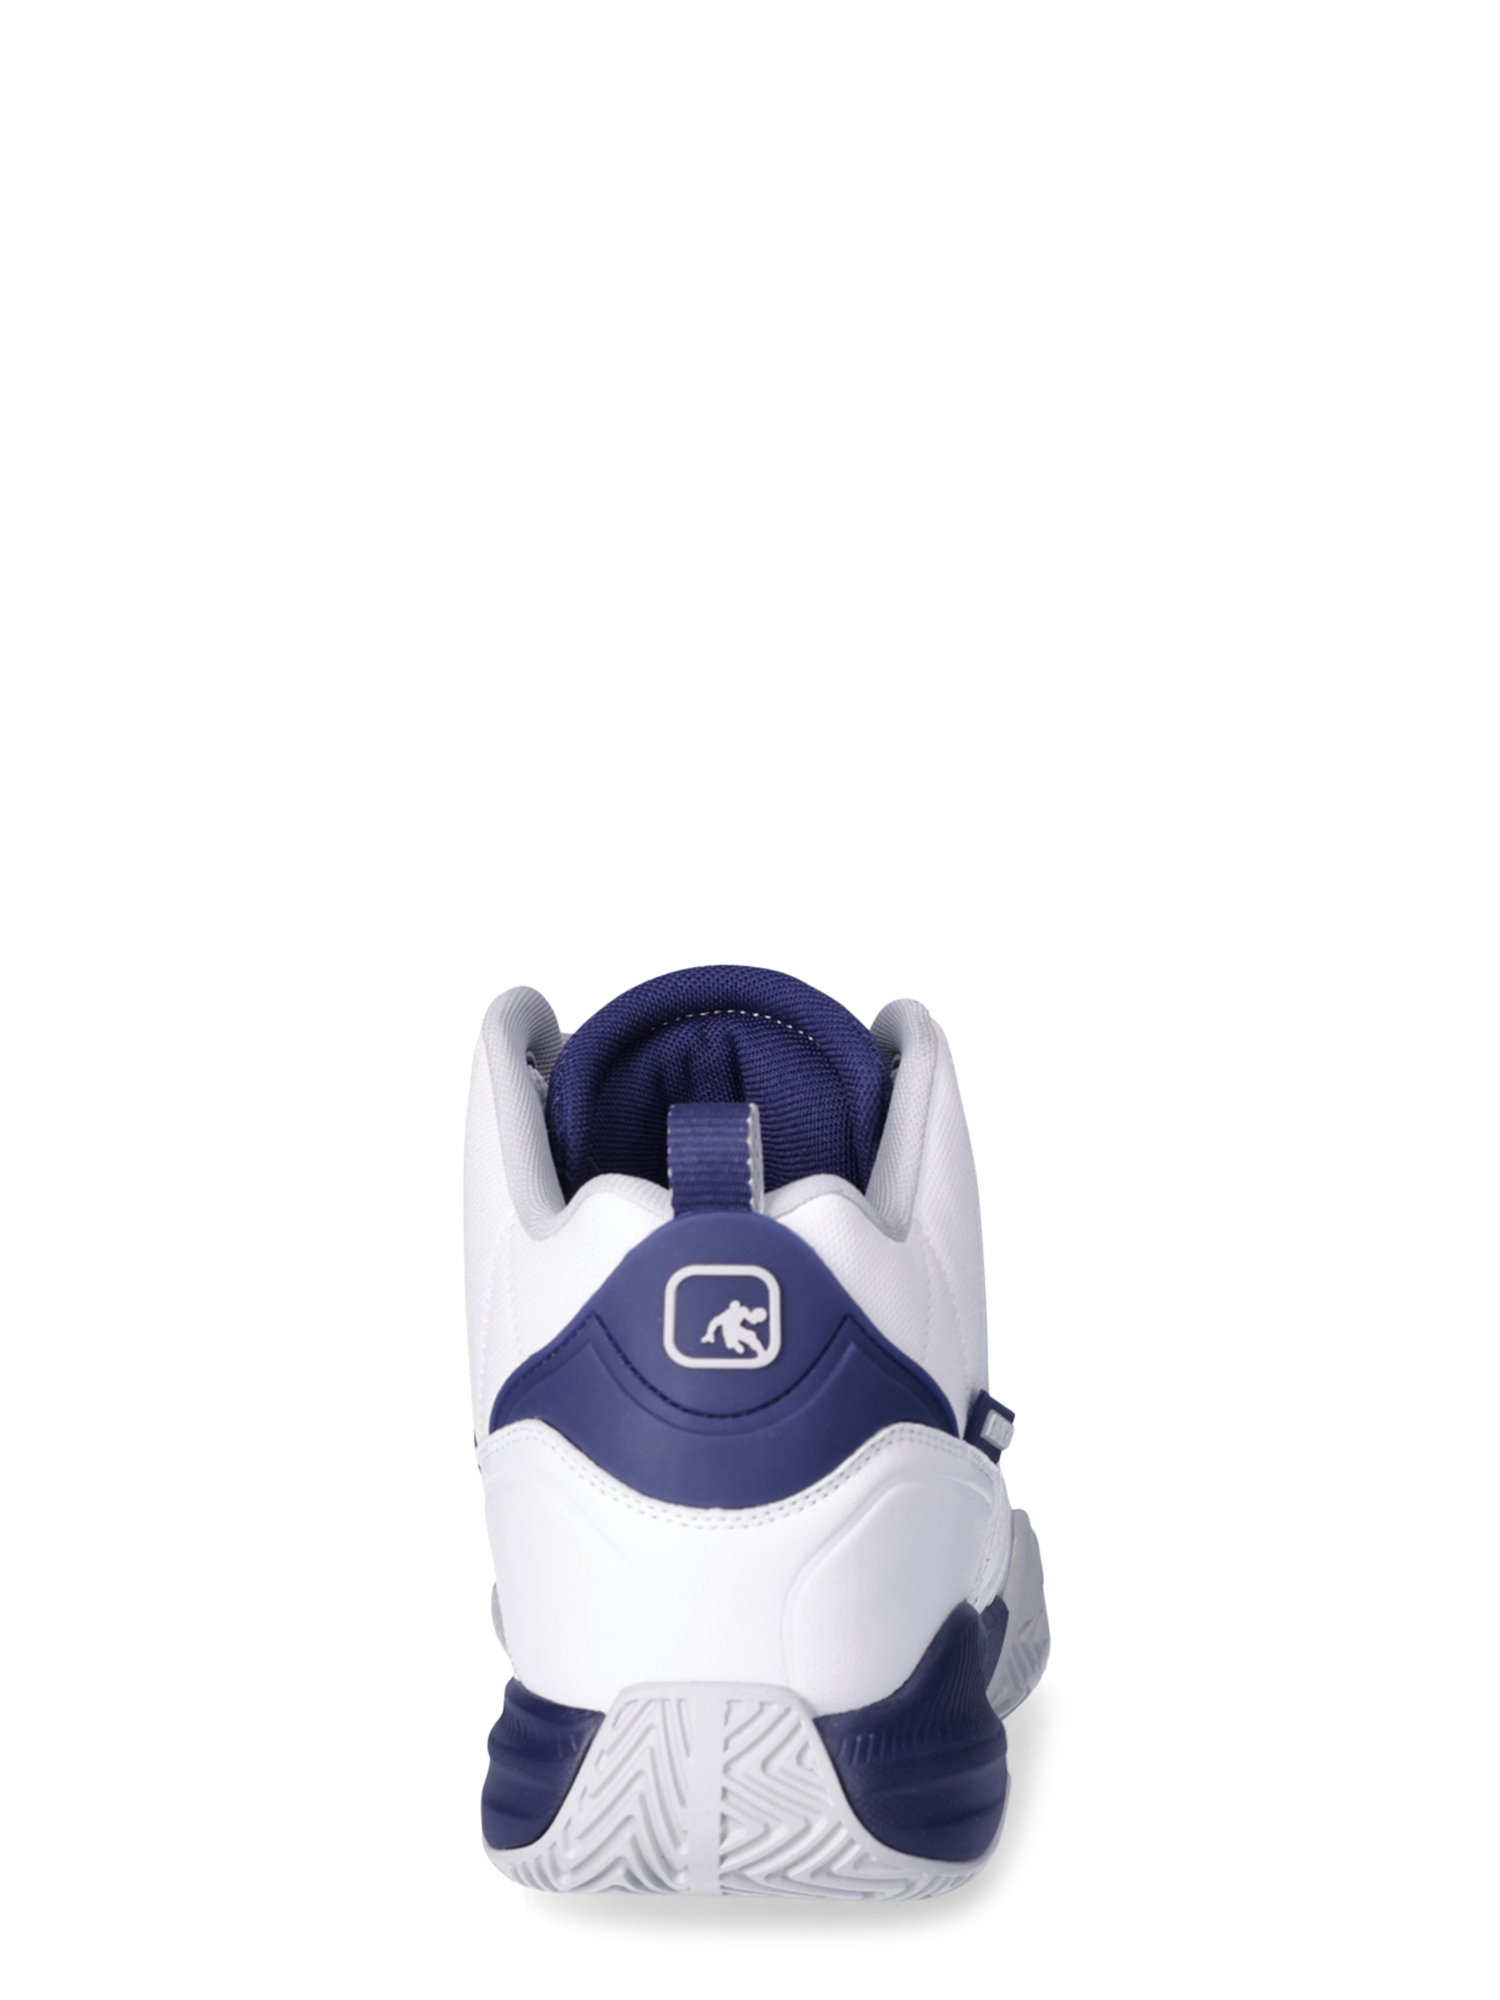 AND1 Men’s Streetball Basketball High-Top Sneakers - image 5 of 6